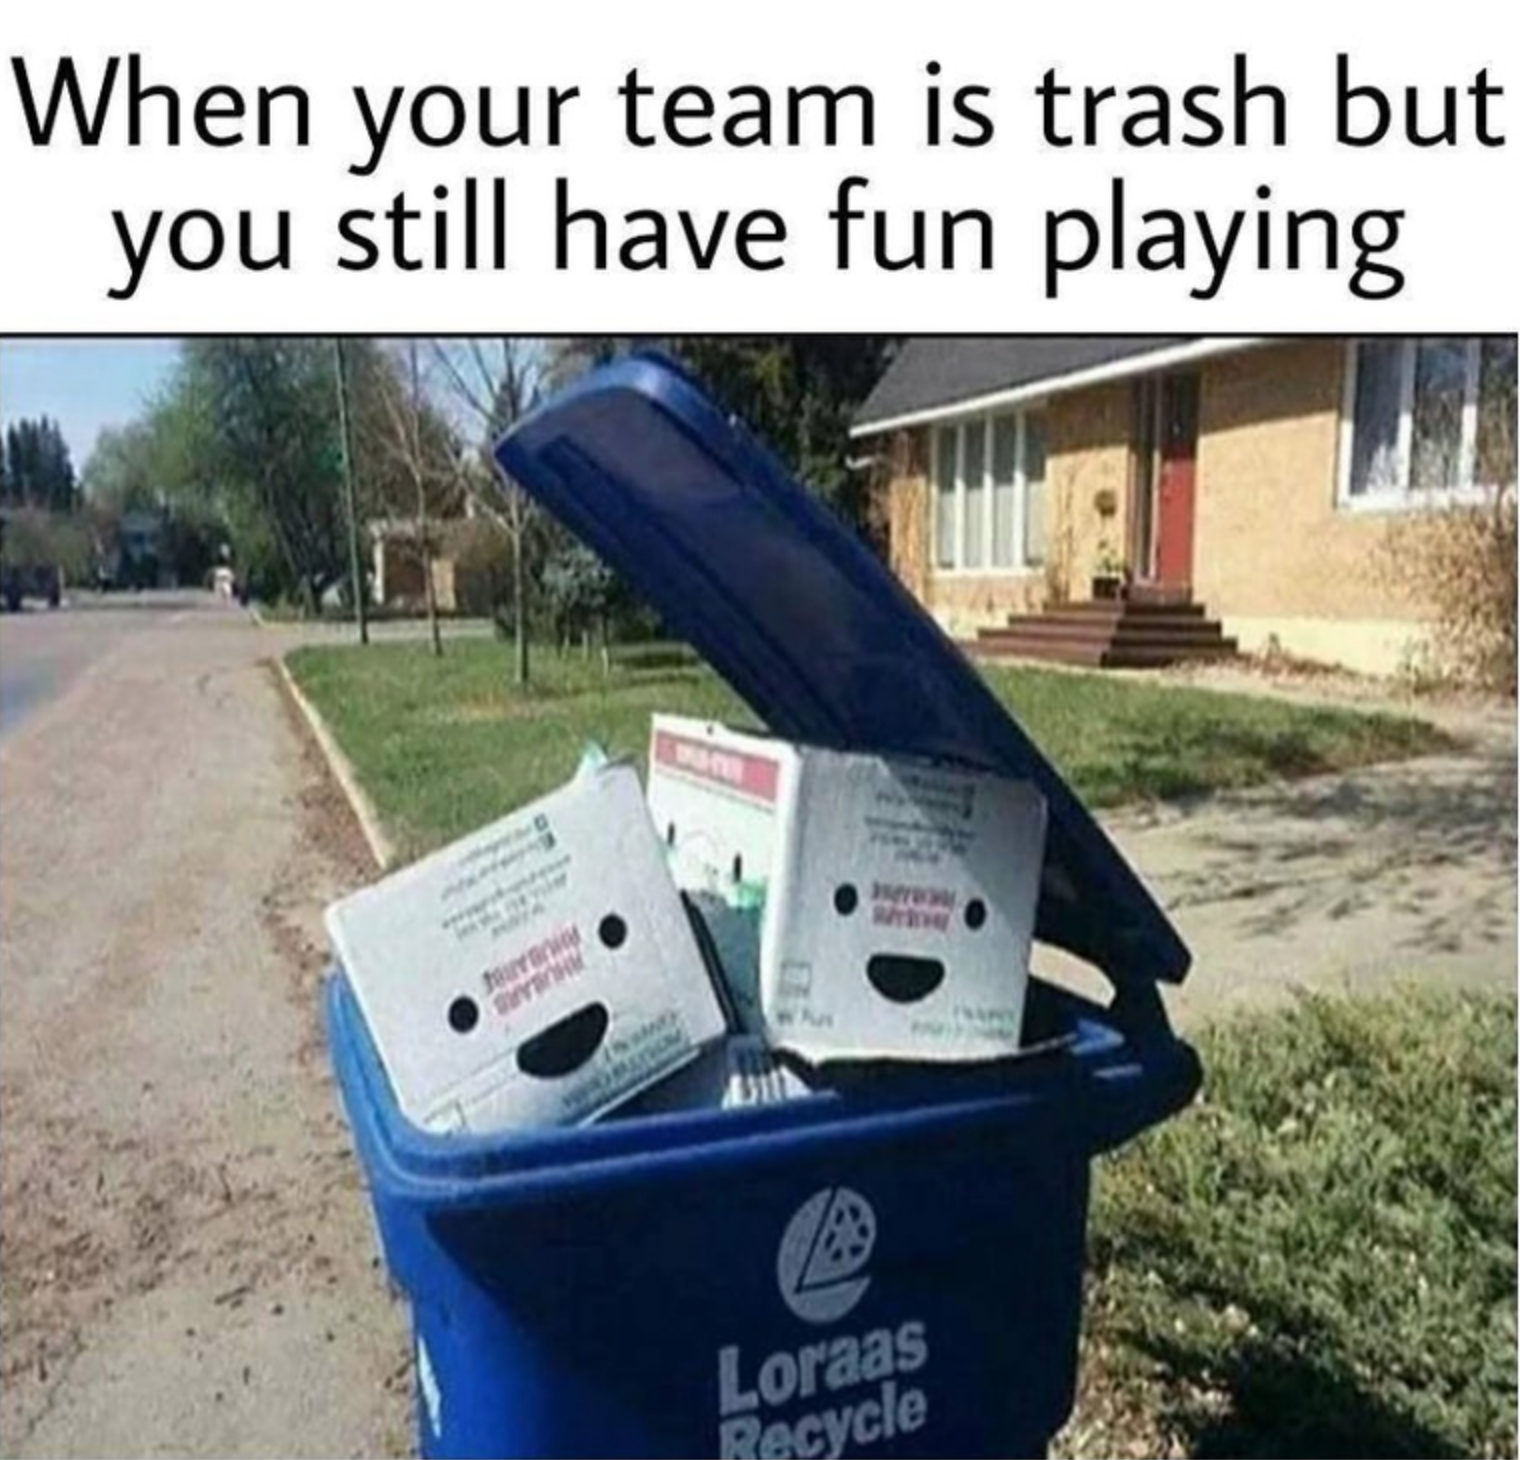 your team is trash but you still have fun - When your team is trash but you still have fun playing Loraas Recycle